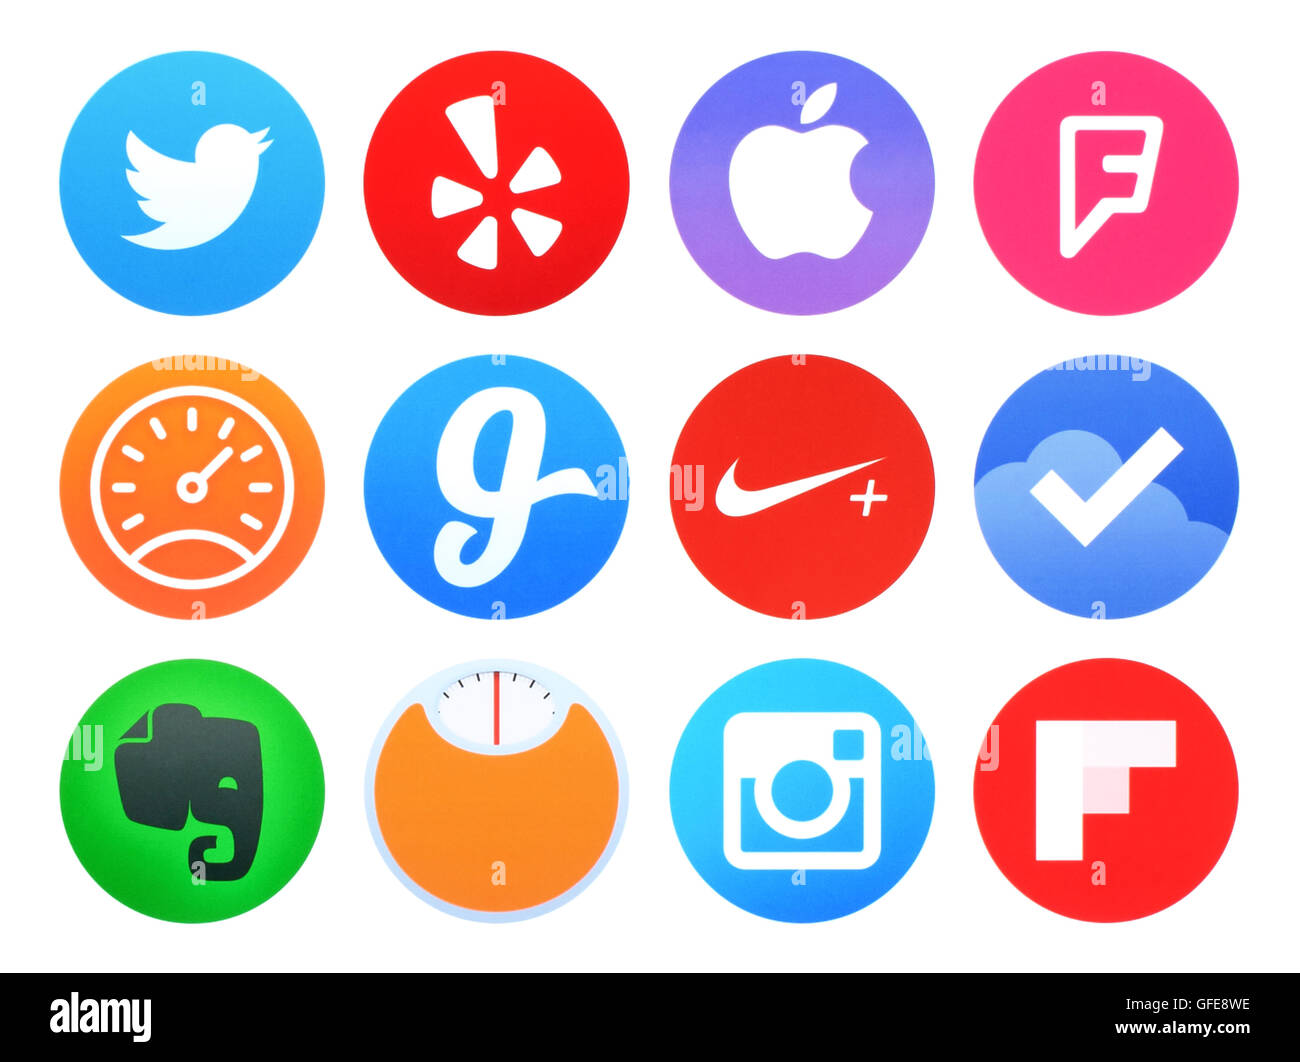 Kiev, Ukraine - April 28, 2016: Collection of popular Apple watch application icons printed on paper: Twitter, etc. Stock Photo